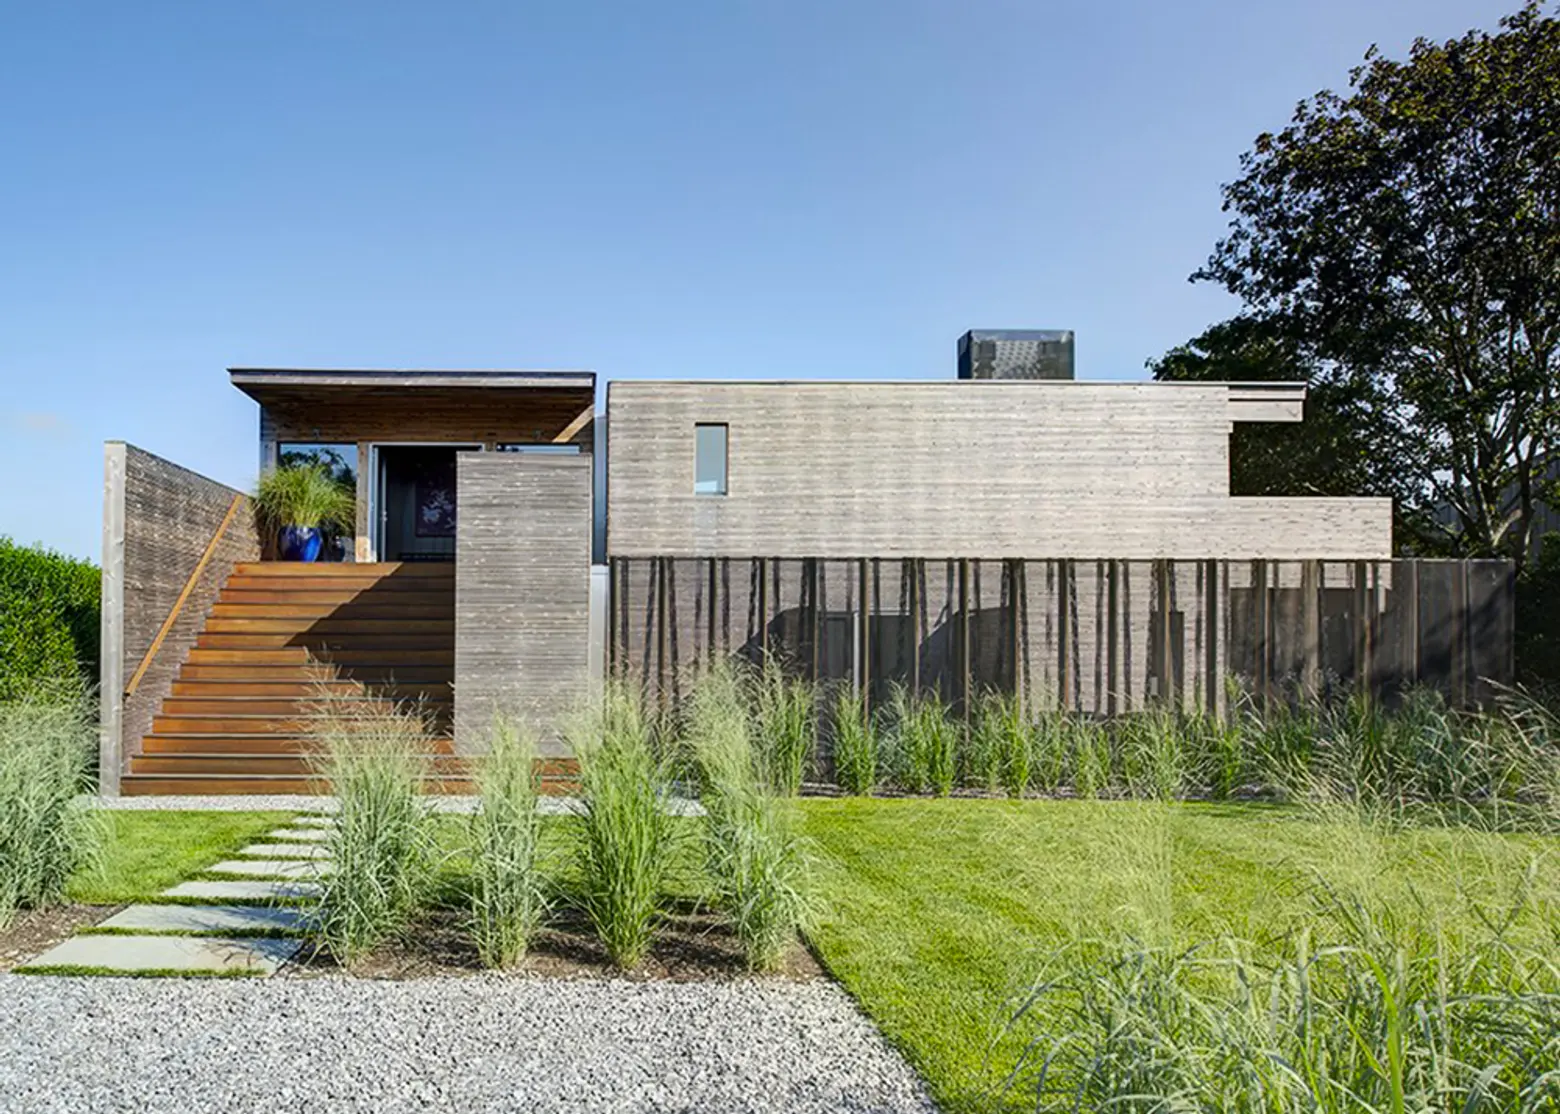 Bates Masi + Architects, prefabricated materials, prefabricated extension, Far Pond Residence, Hurricane-Proof, Waste-Free, Long Island, Southampton